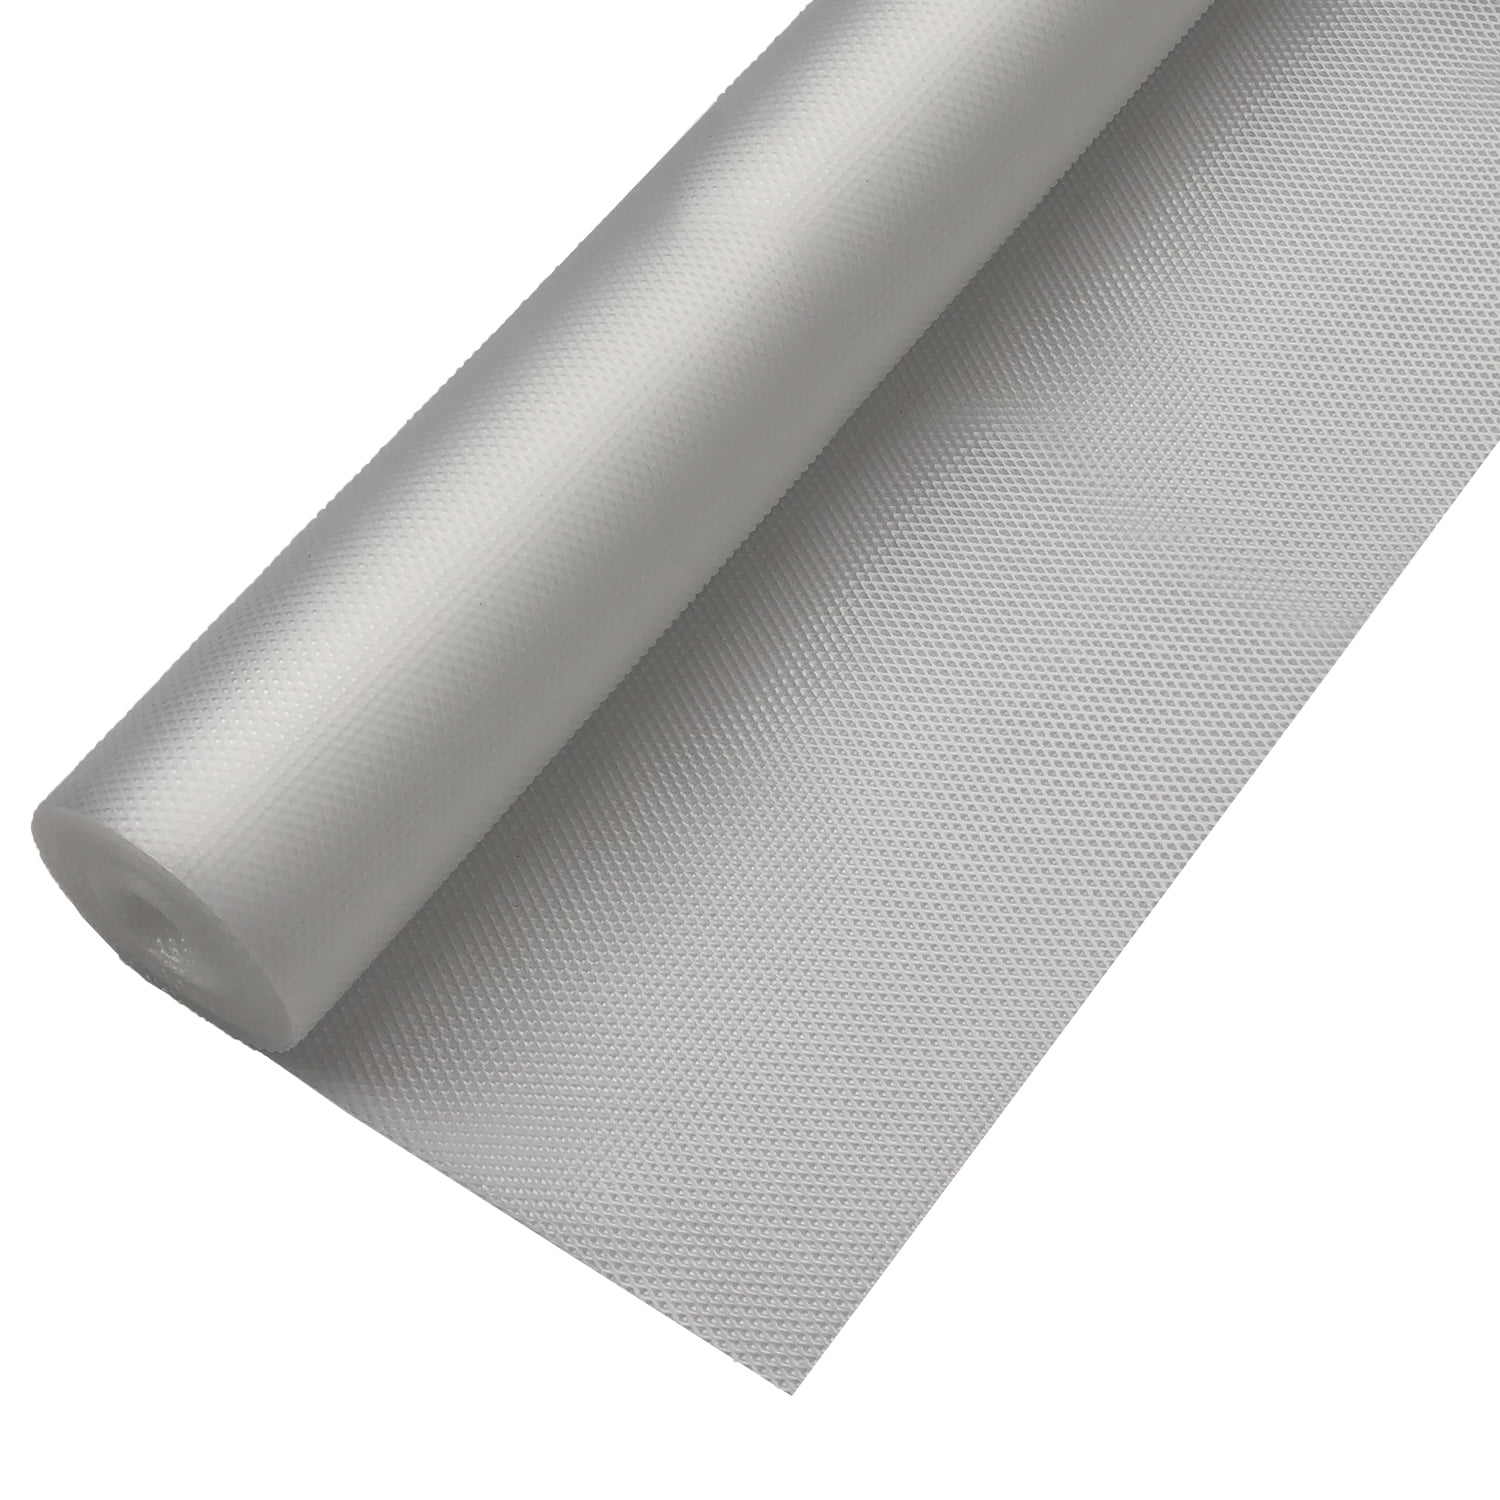 Clevr Premium 18 in. x 15 ft. Non-Adhesive Shelf Liner, Clear